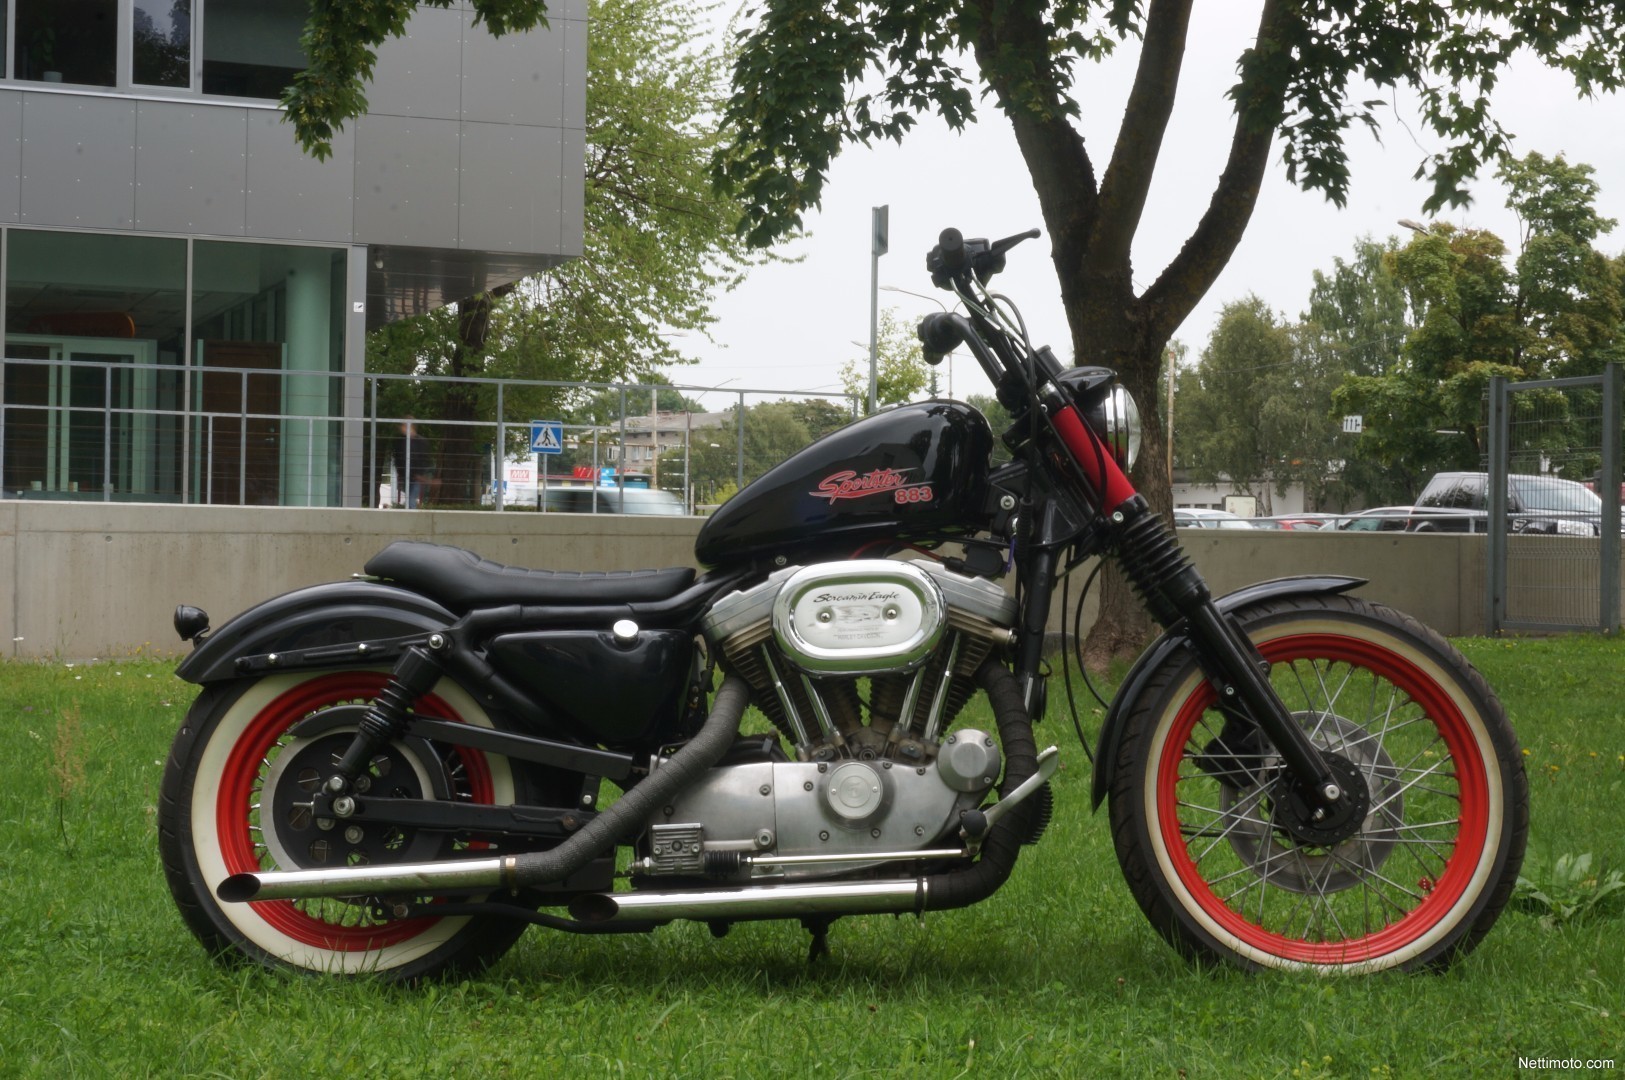 2008 Harley-Davidson XL883 Sportster 883 accident lawyers info